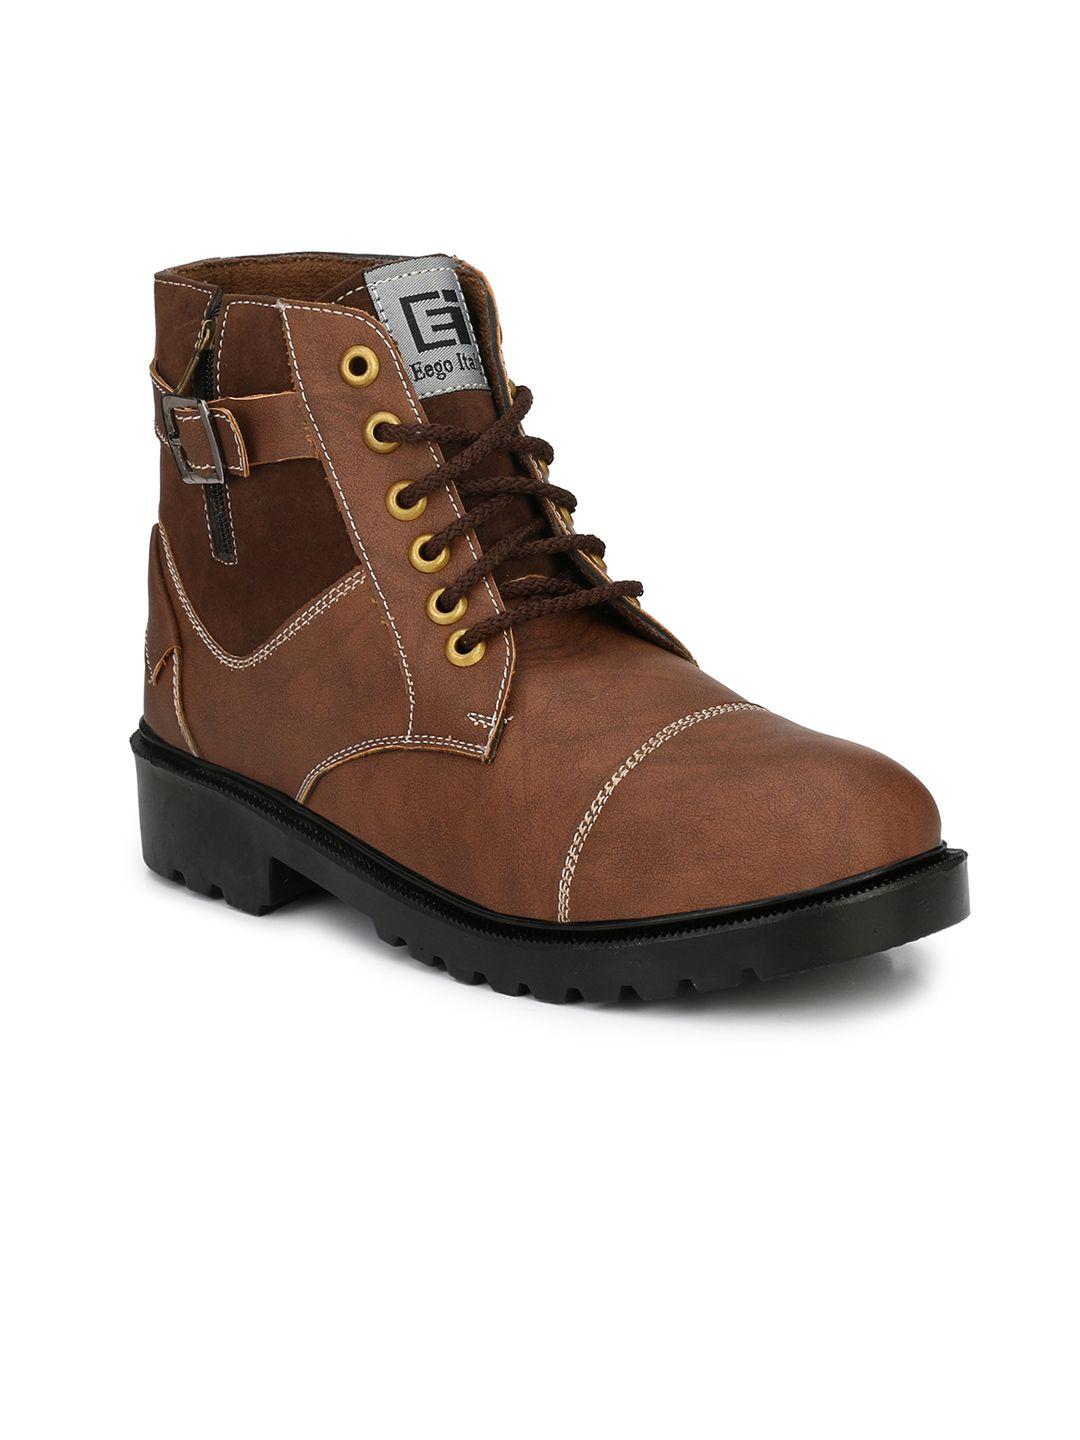 eego italy men brown colourblocked synthetic high-top flat boots